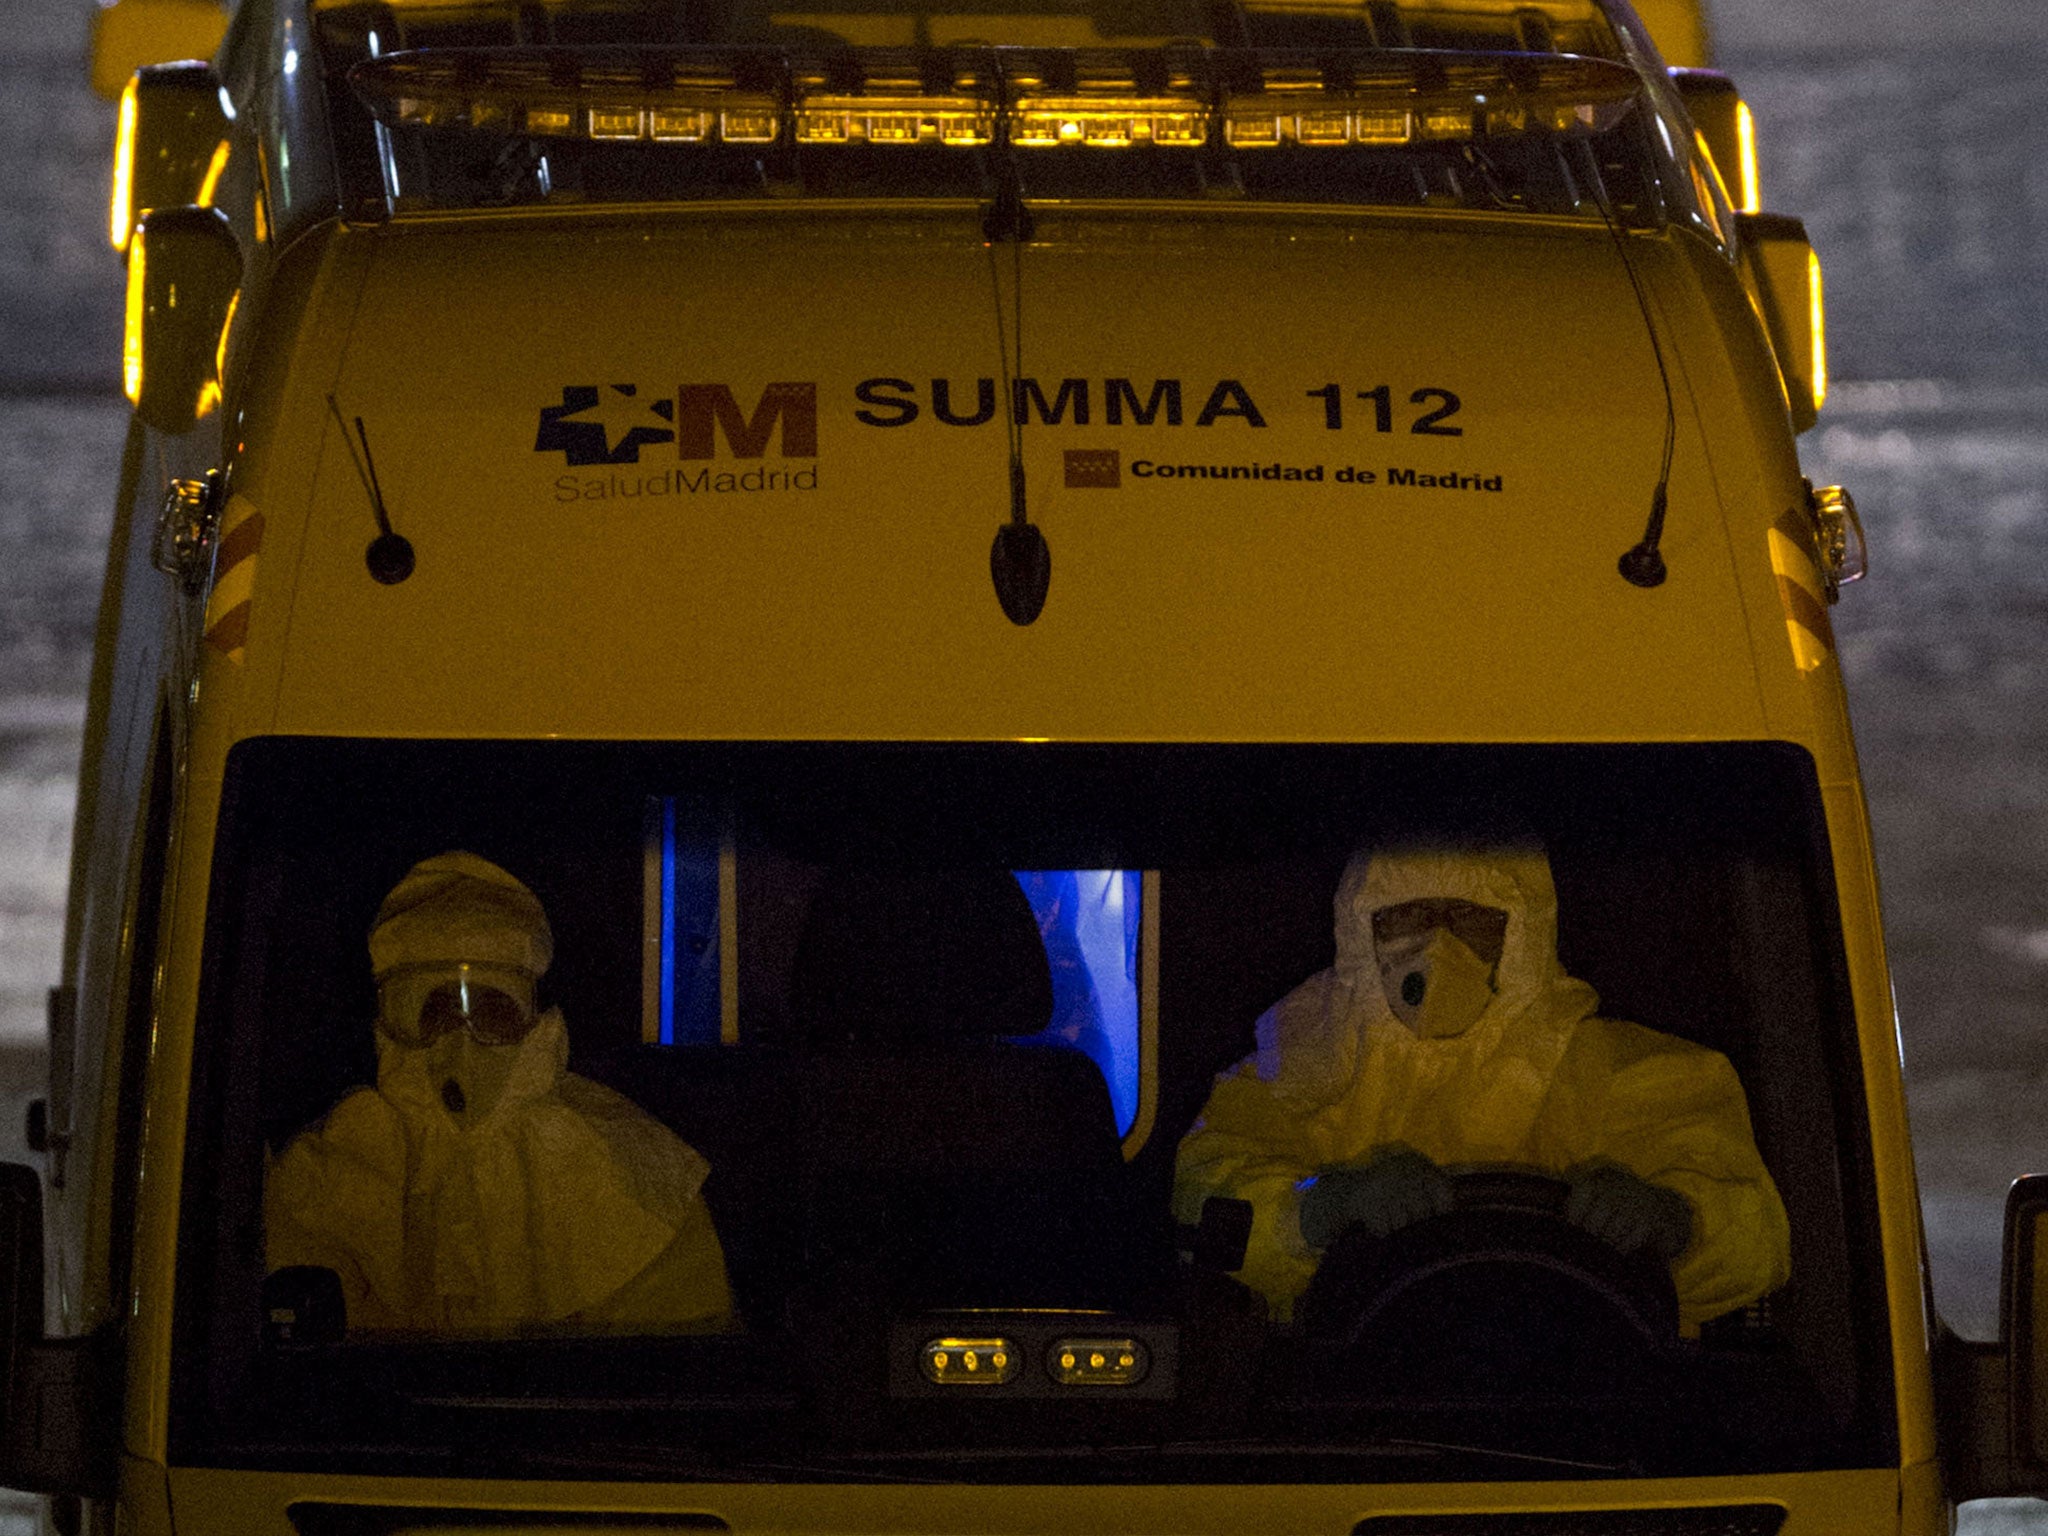 The Spanish nurse infected by Ebola is moved by ambulance to Carlos III Hospital from Alcorcon Hospital on October 8, 2014 in Alcorcon, Spain.